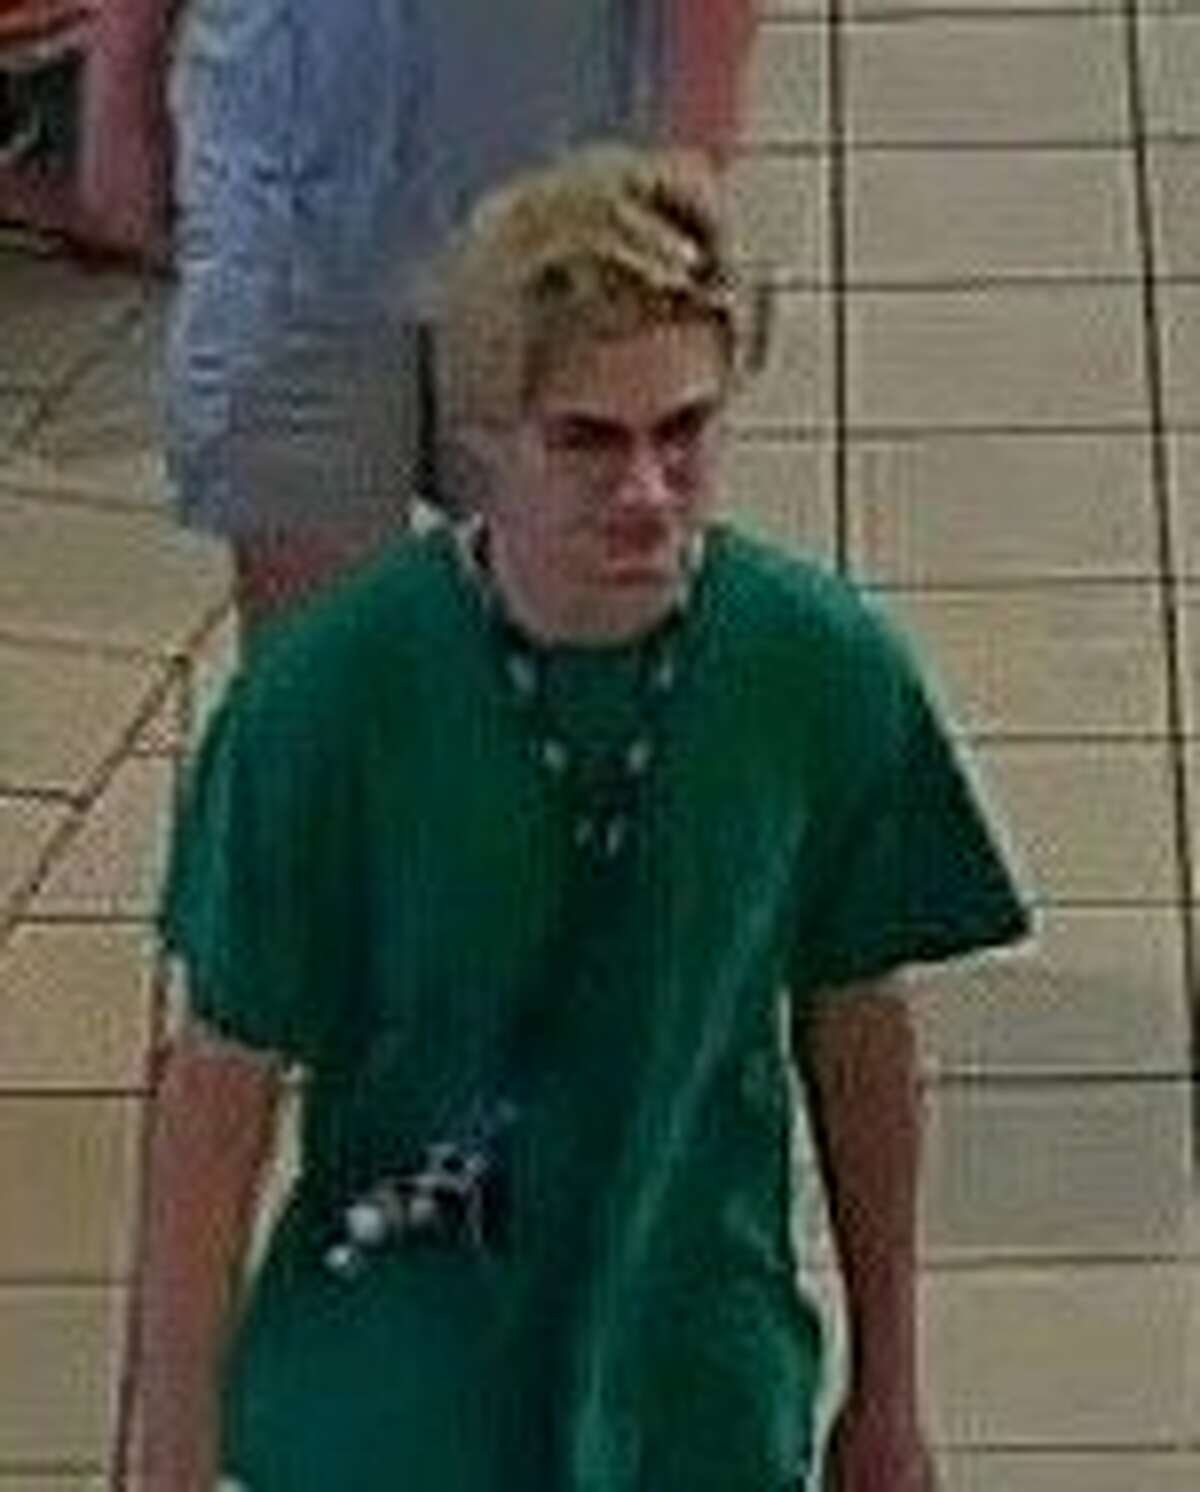 Police released this image Monday of a person of interest related to the panic at Memorial City Mall over the weekend.